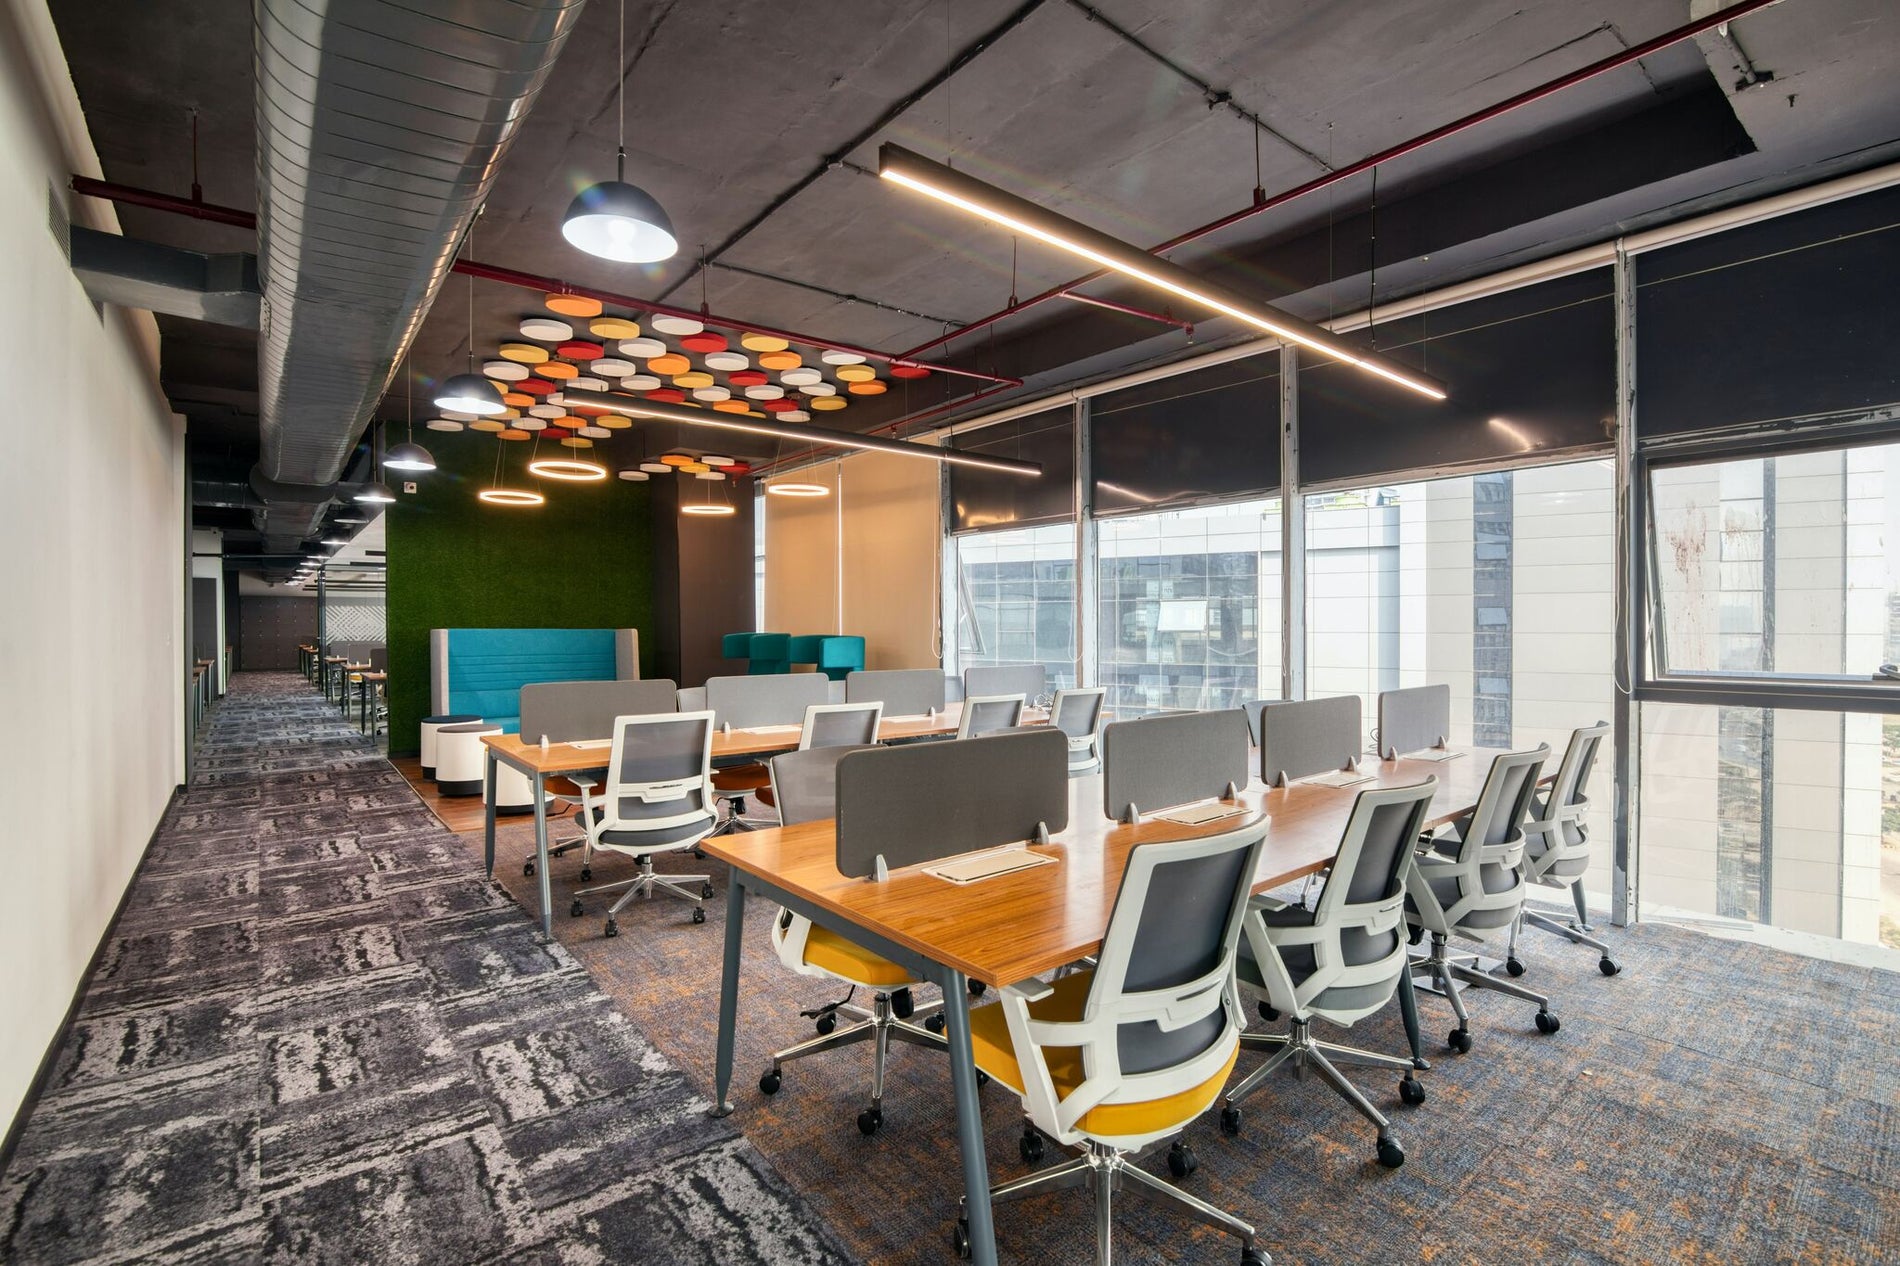 Reasons Why Good Office Design Matters?